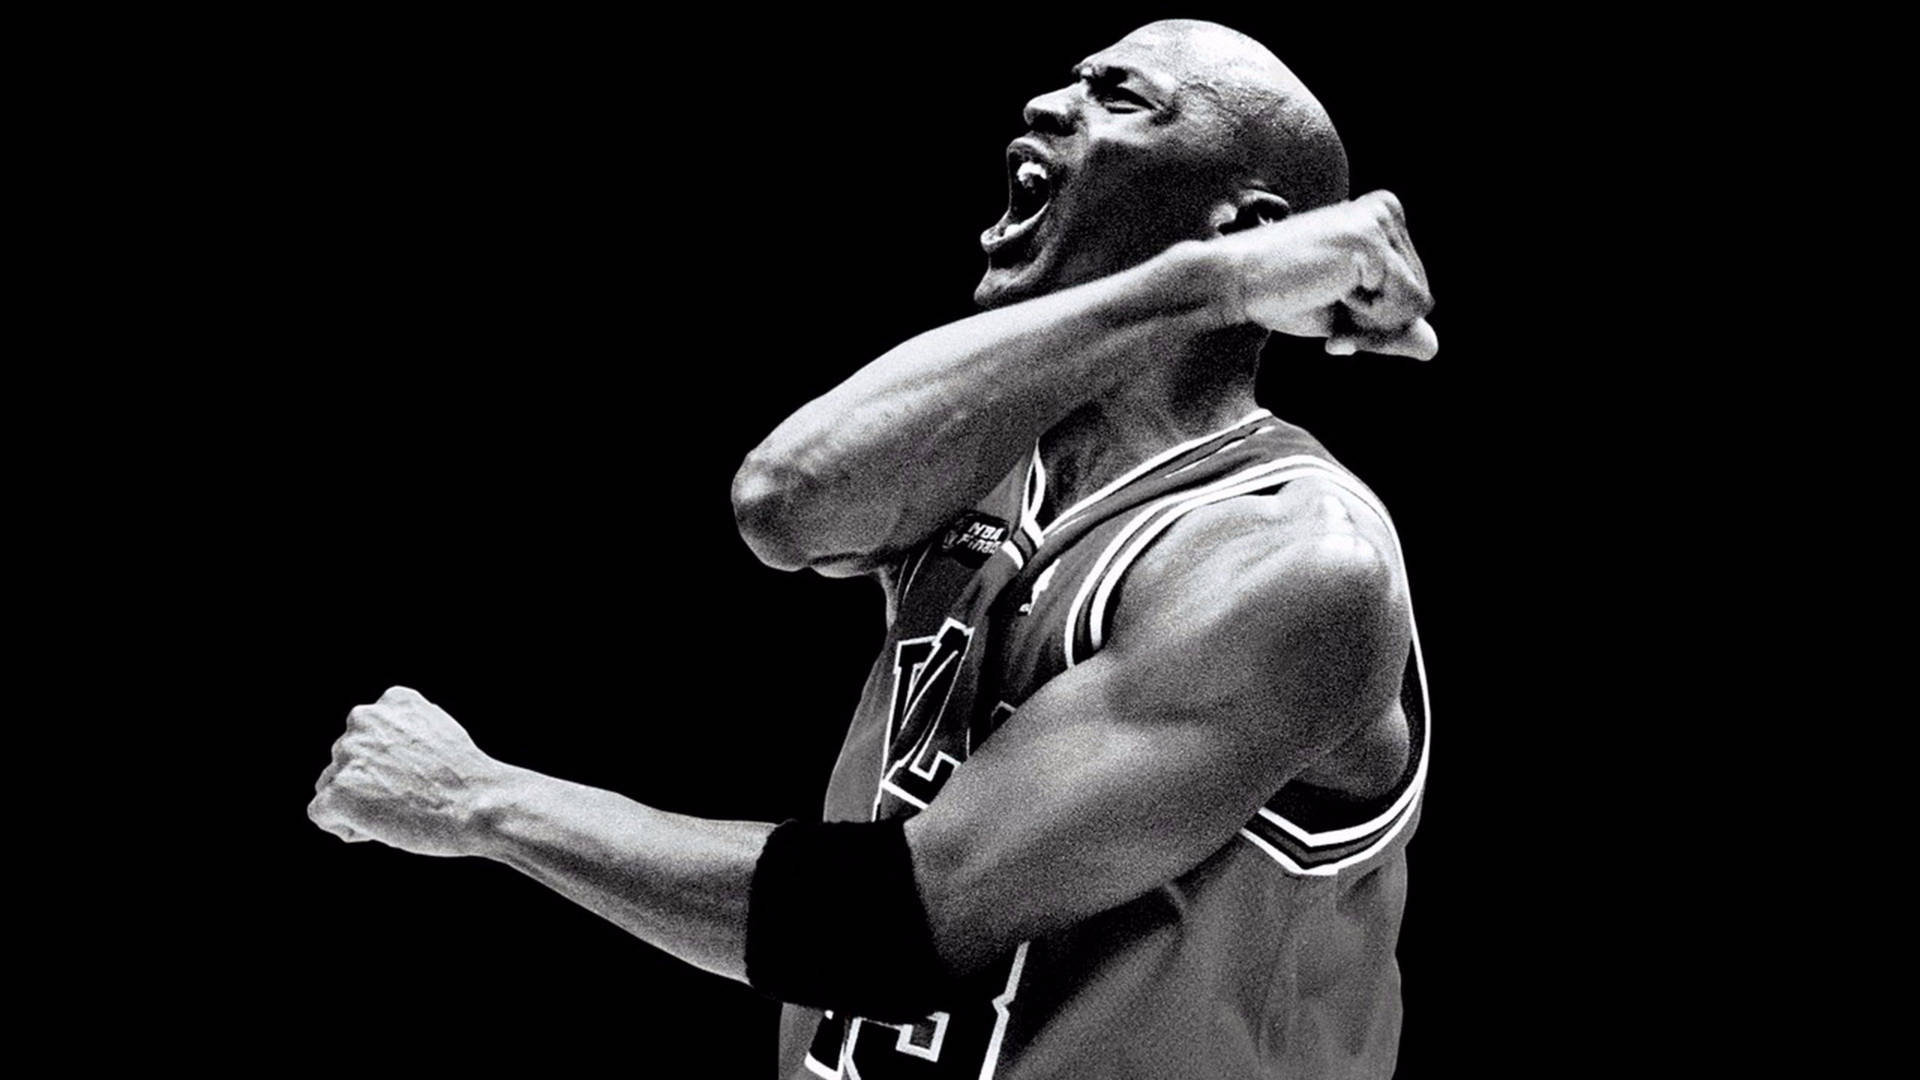 The Iconic Michael Jordan - The Greatest of all Time Wallpaper